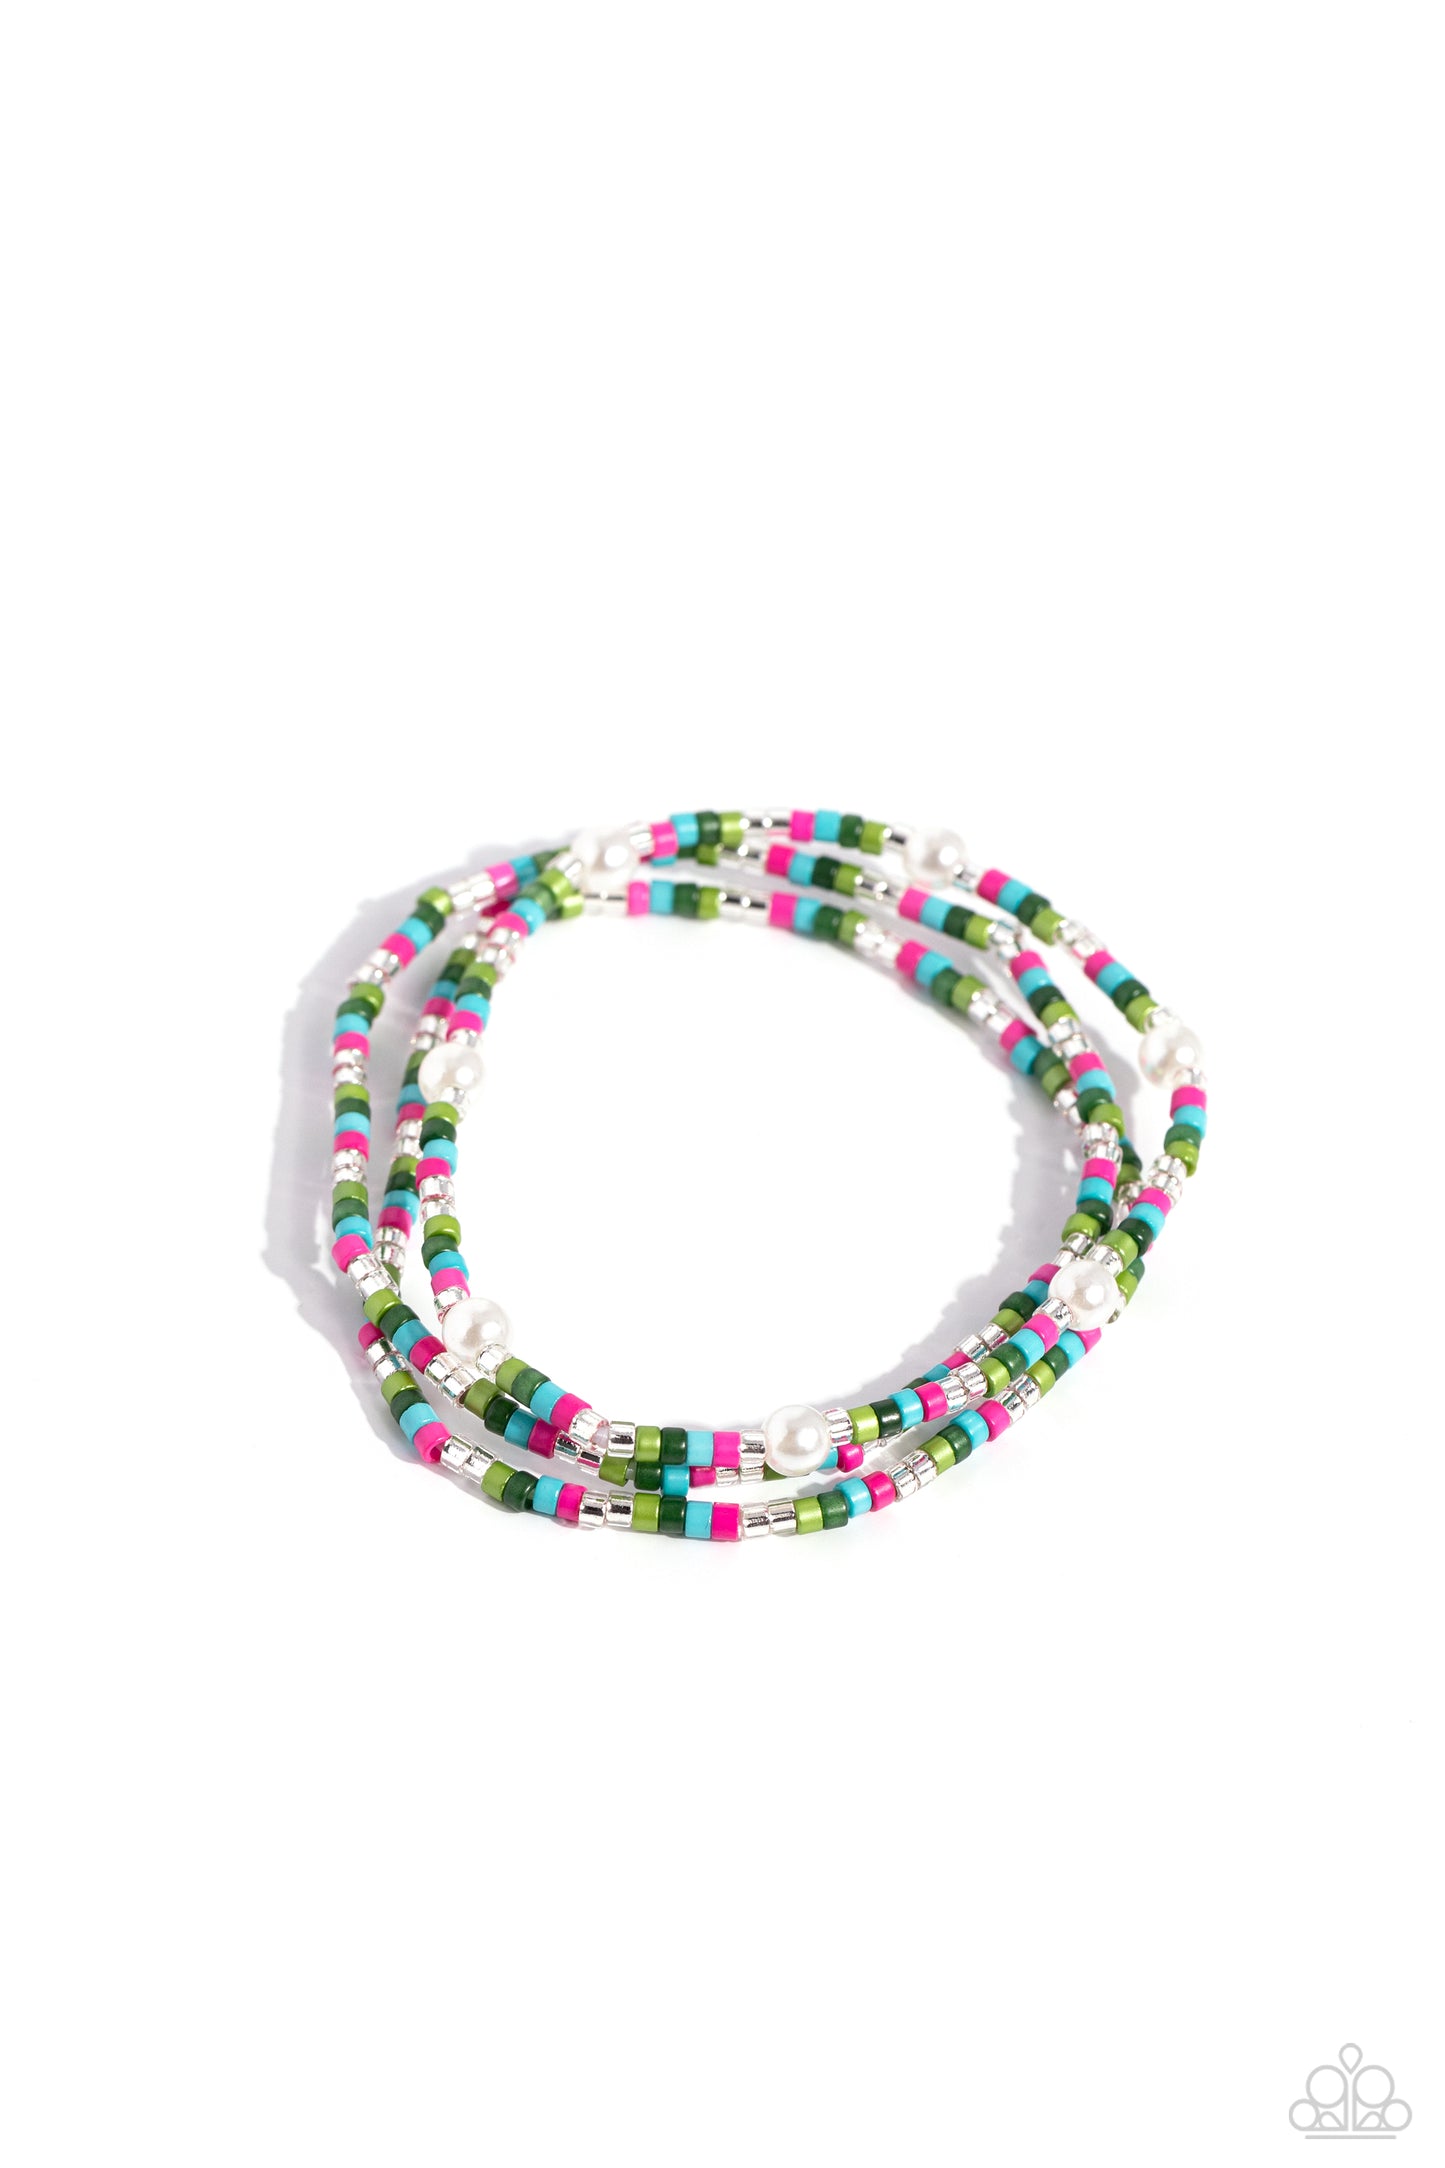 Colorblock Cache Green Bracelet - Paparazzi Accessories  A collection of Kohlrabi, Classic Green, turquoise, pink, and silvery thin seed bead strands are threaded along stretchy bands, resulting in a colorfully playful style around the wrist. Dainty white pearls are sporadically scattered amongst one of the strands, finishing the design off with a touch of coastal inspiration.  Sold as one set of three bracelets.  P9DA-GRXX-065RS